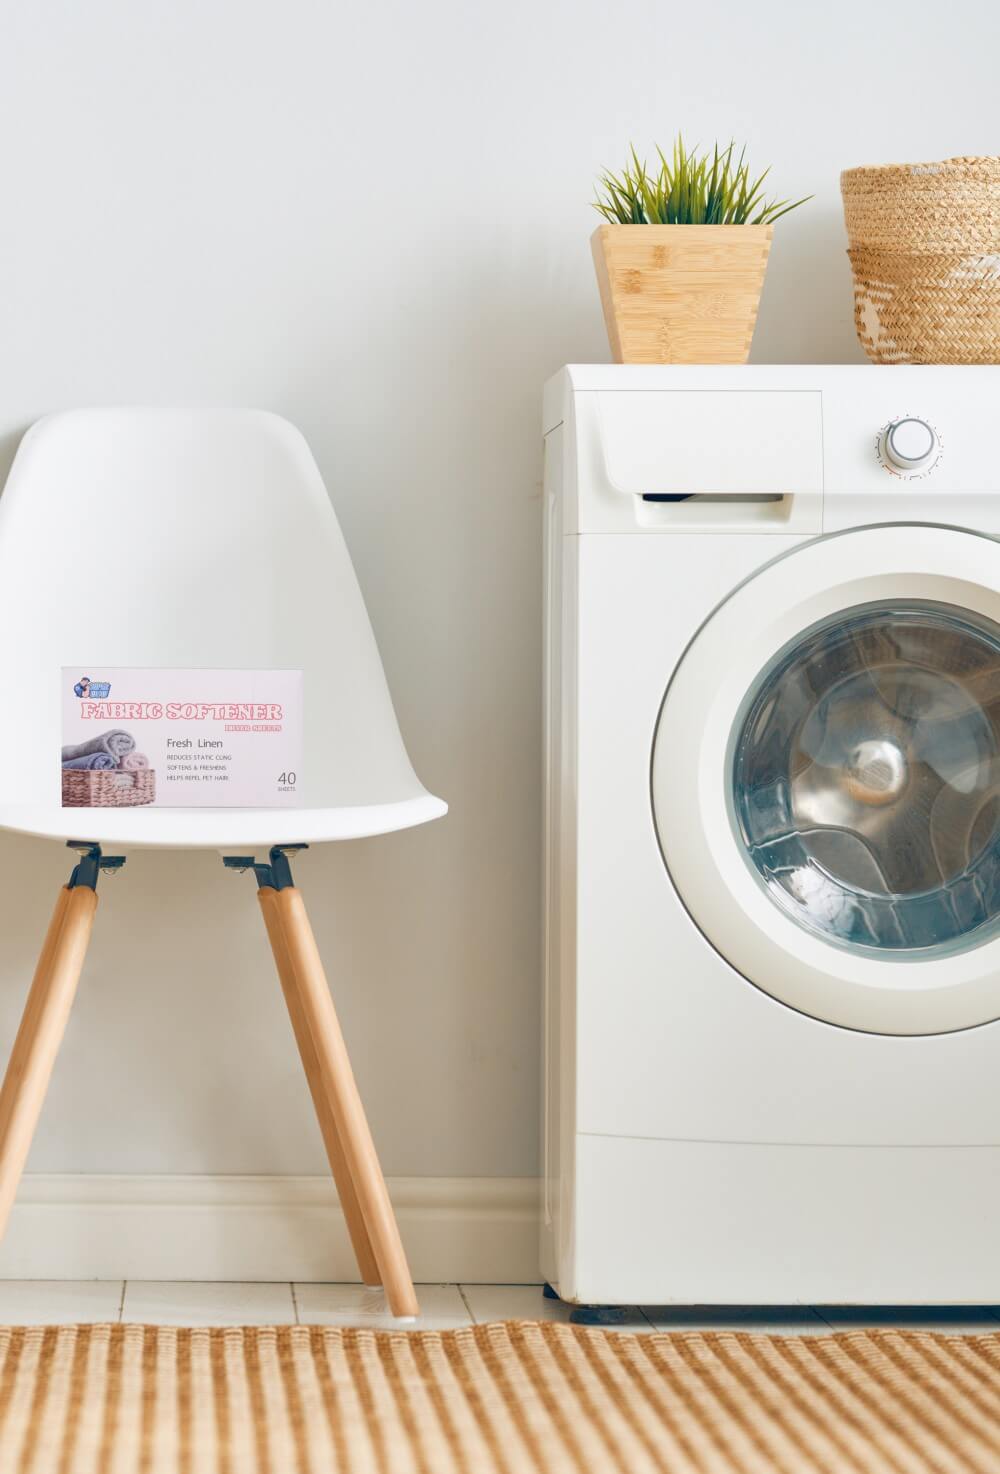 Dryer sheets for home laundries